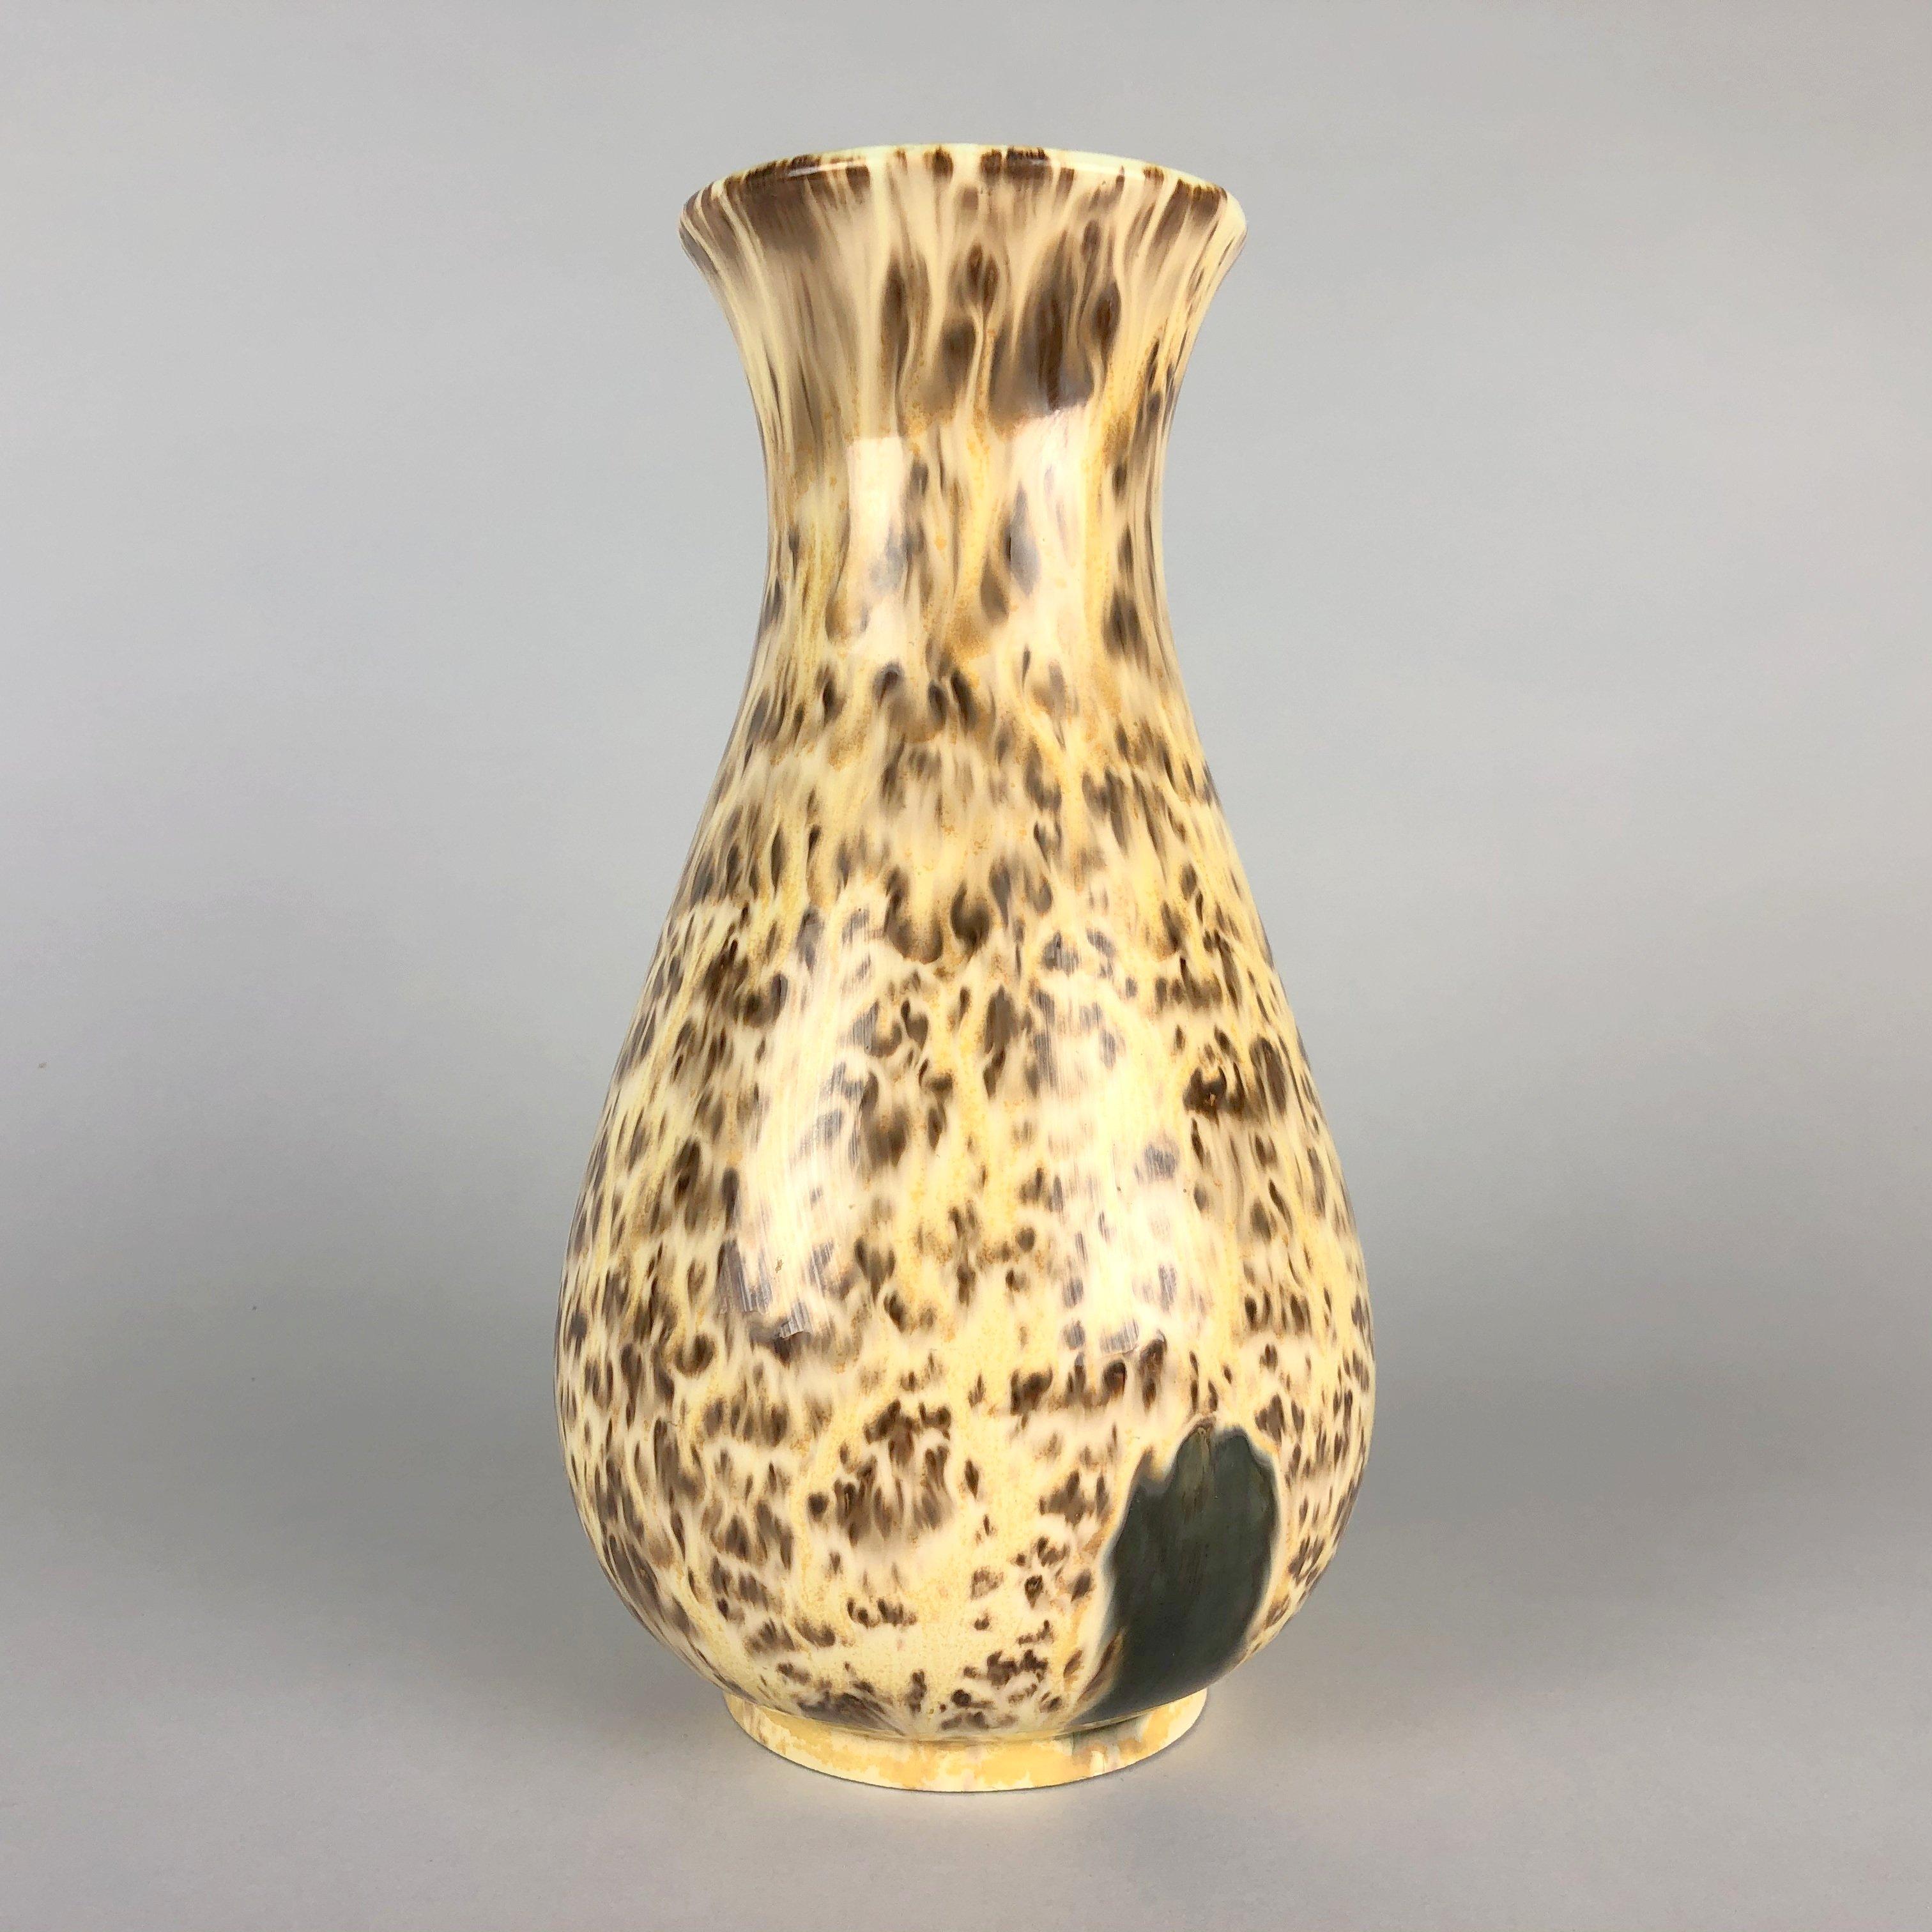 Vintage ceramic vase produced in Czechoslovakia by HOB (Keramika Horní Bríza) in the 1980s. Beige, brown spatter pattern with greenish inside.